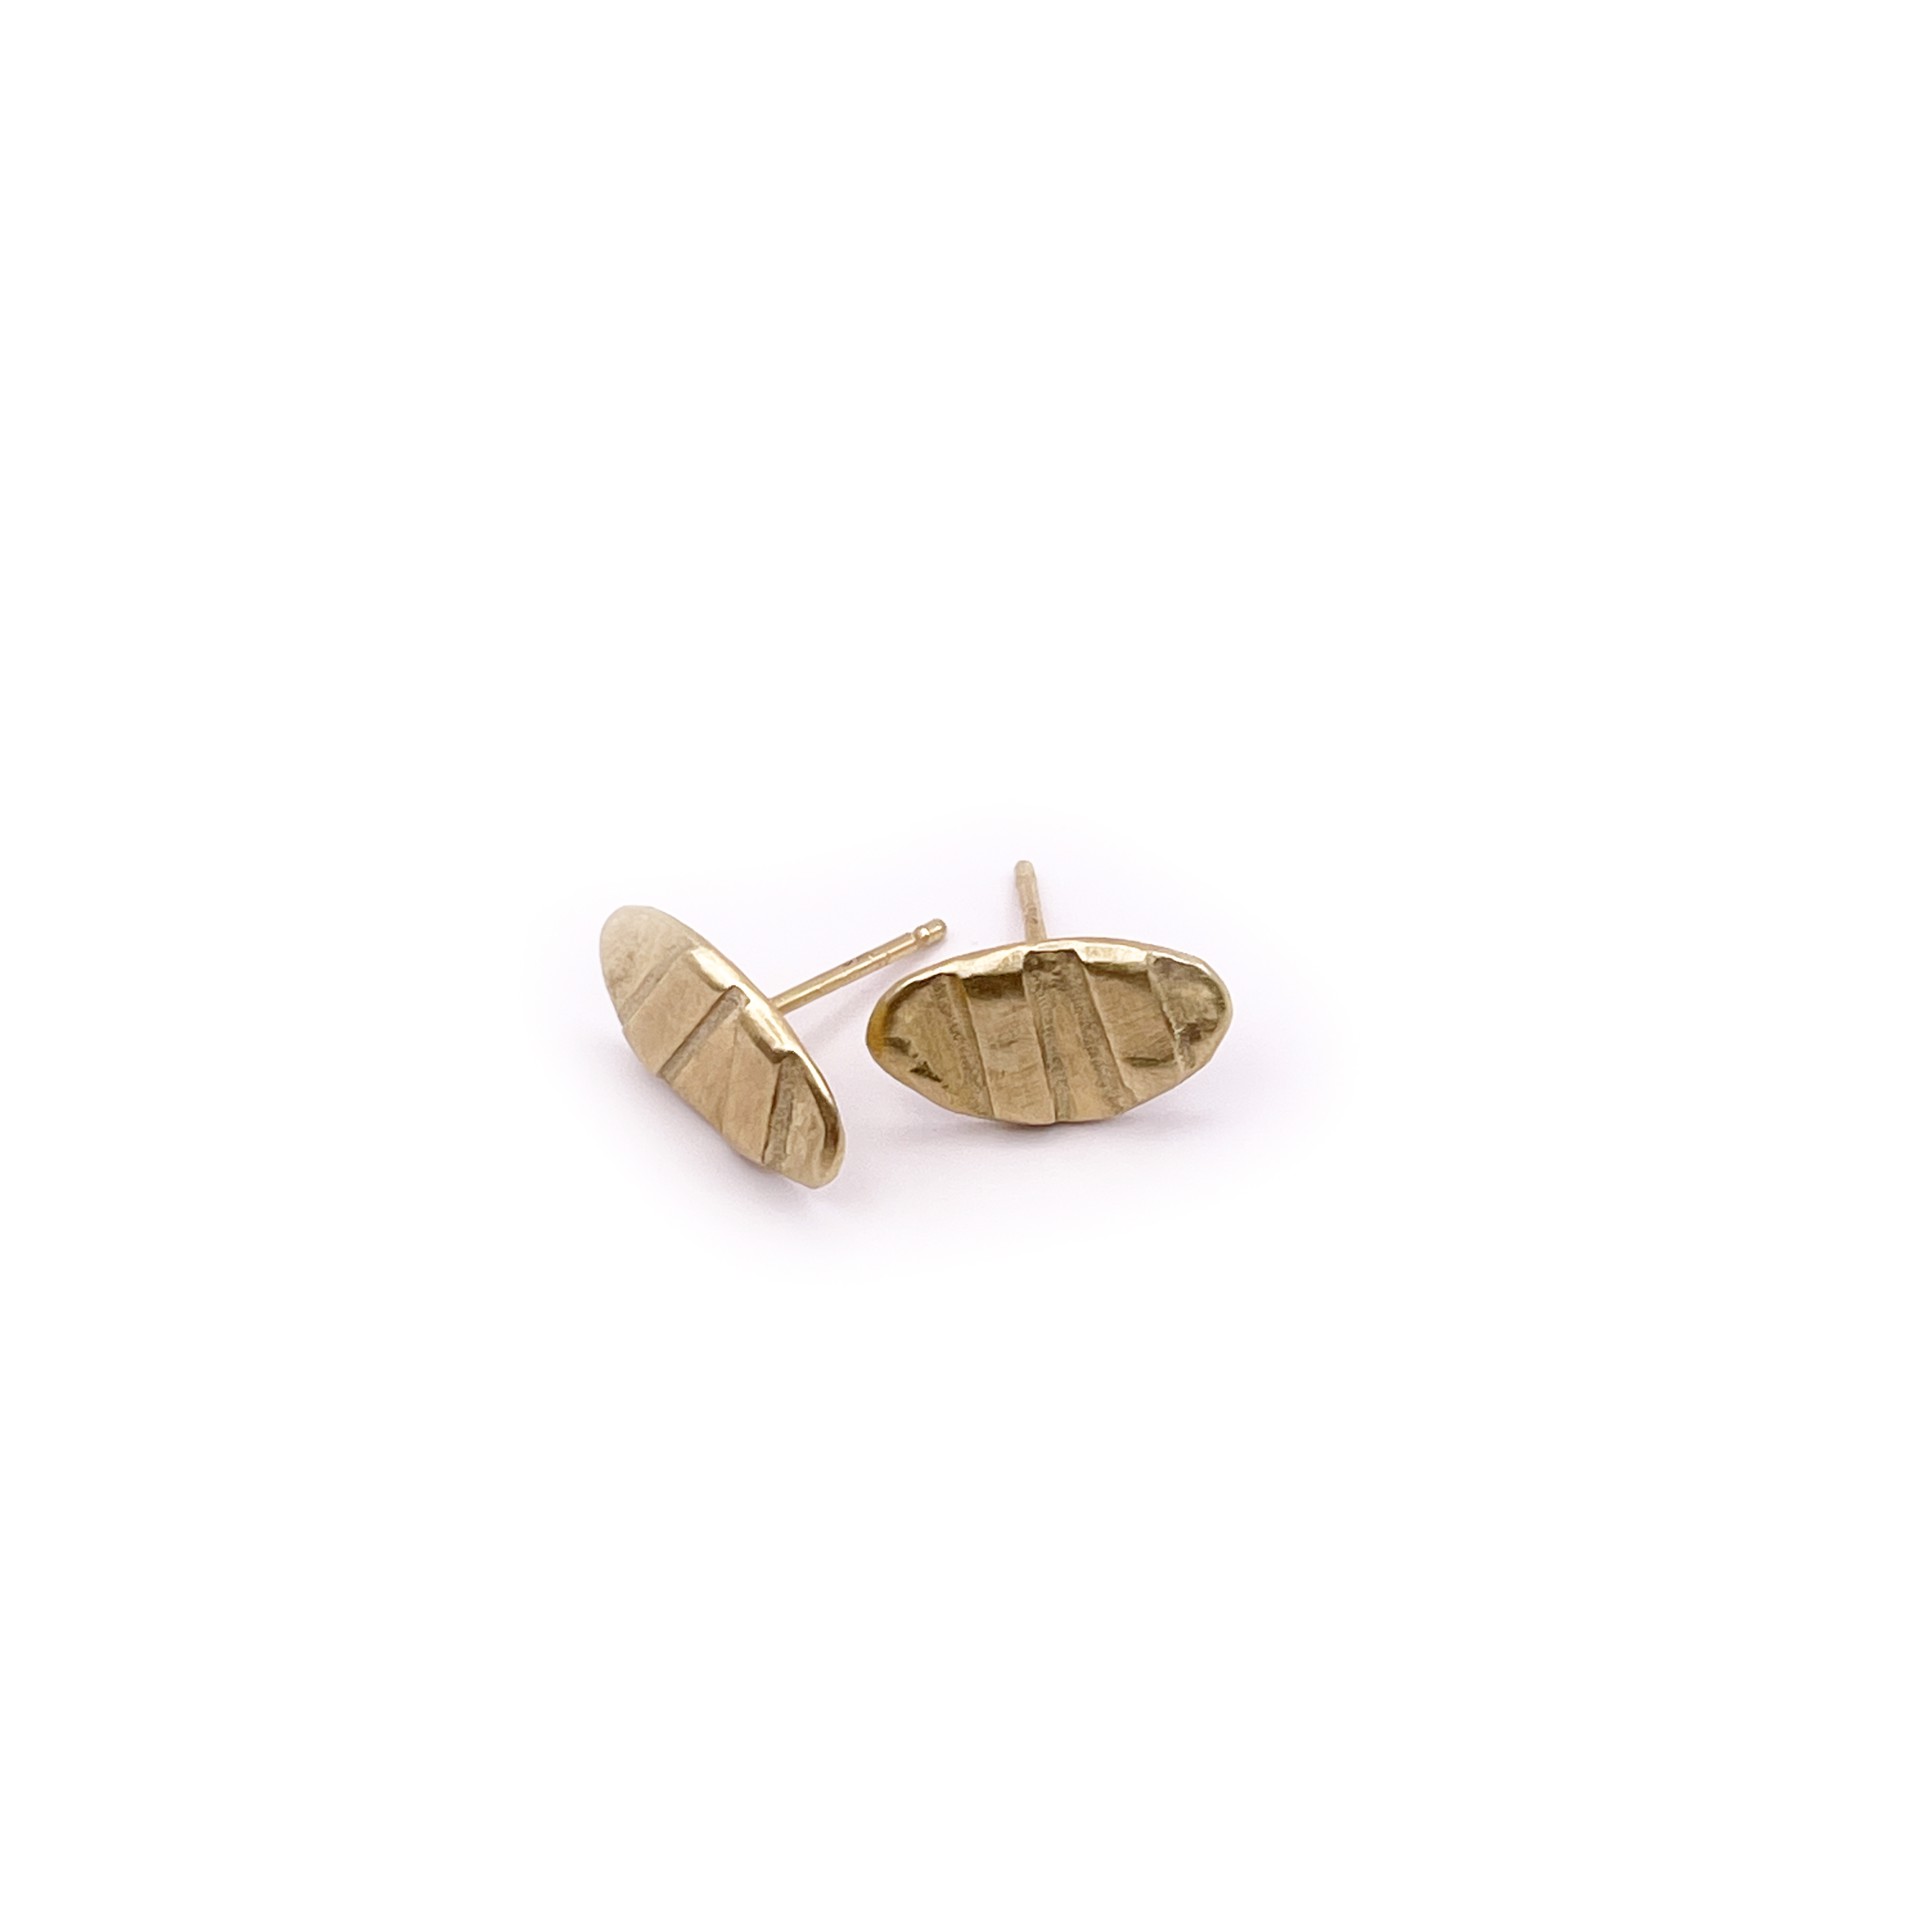 LLE1- Lifeline Small Studs (18k Gold) by Leandra Hill